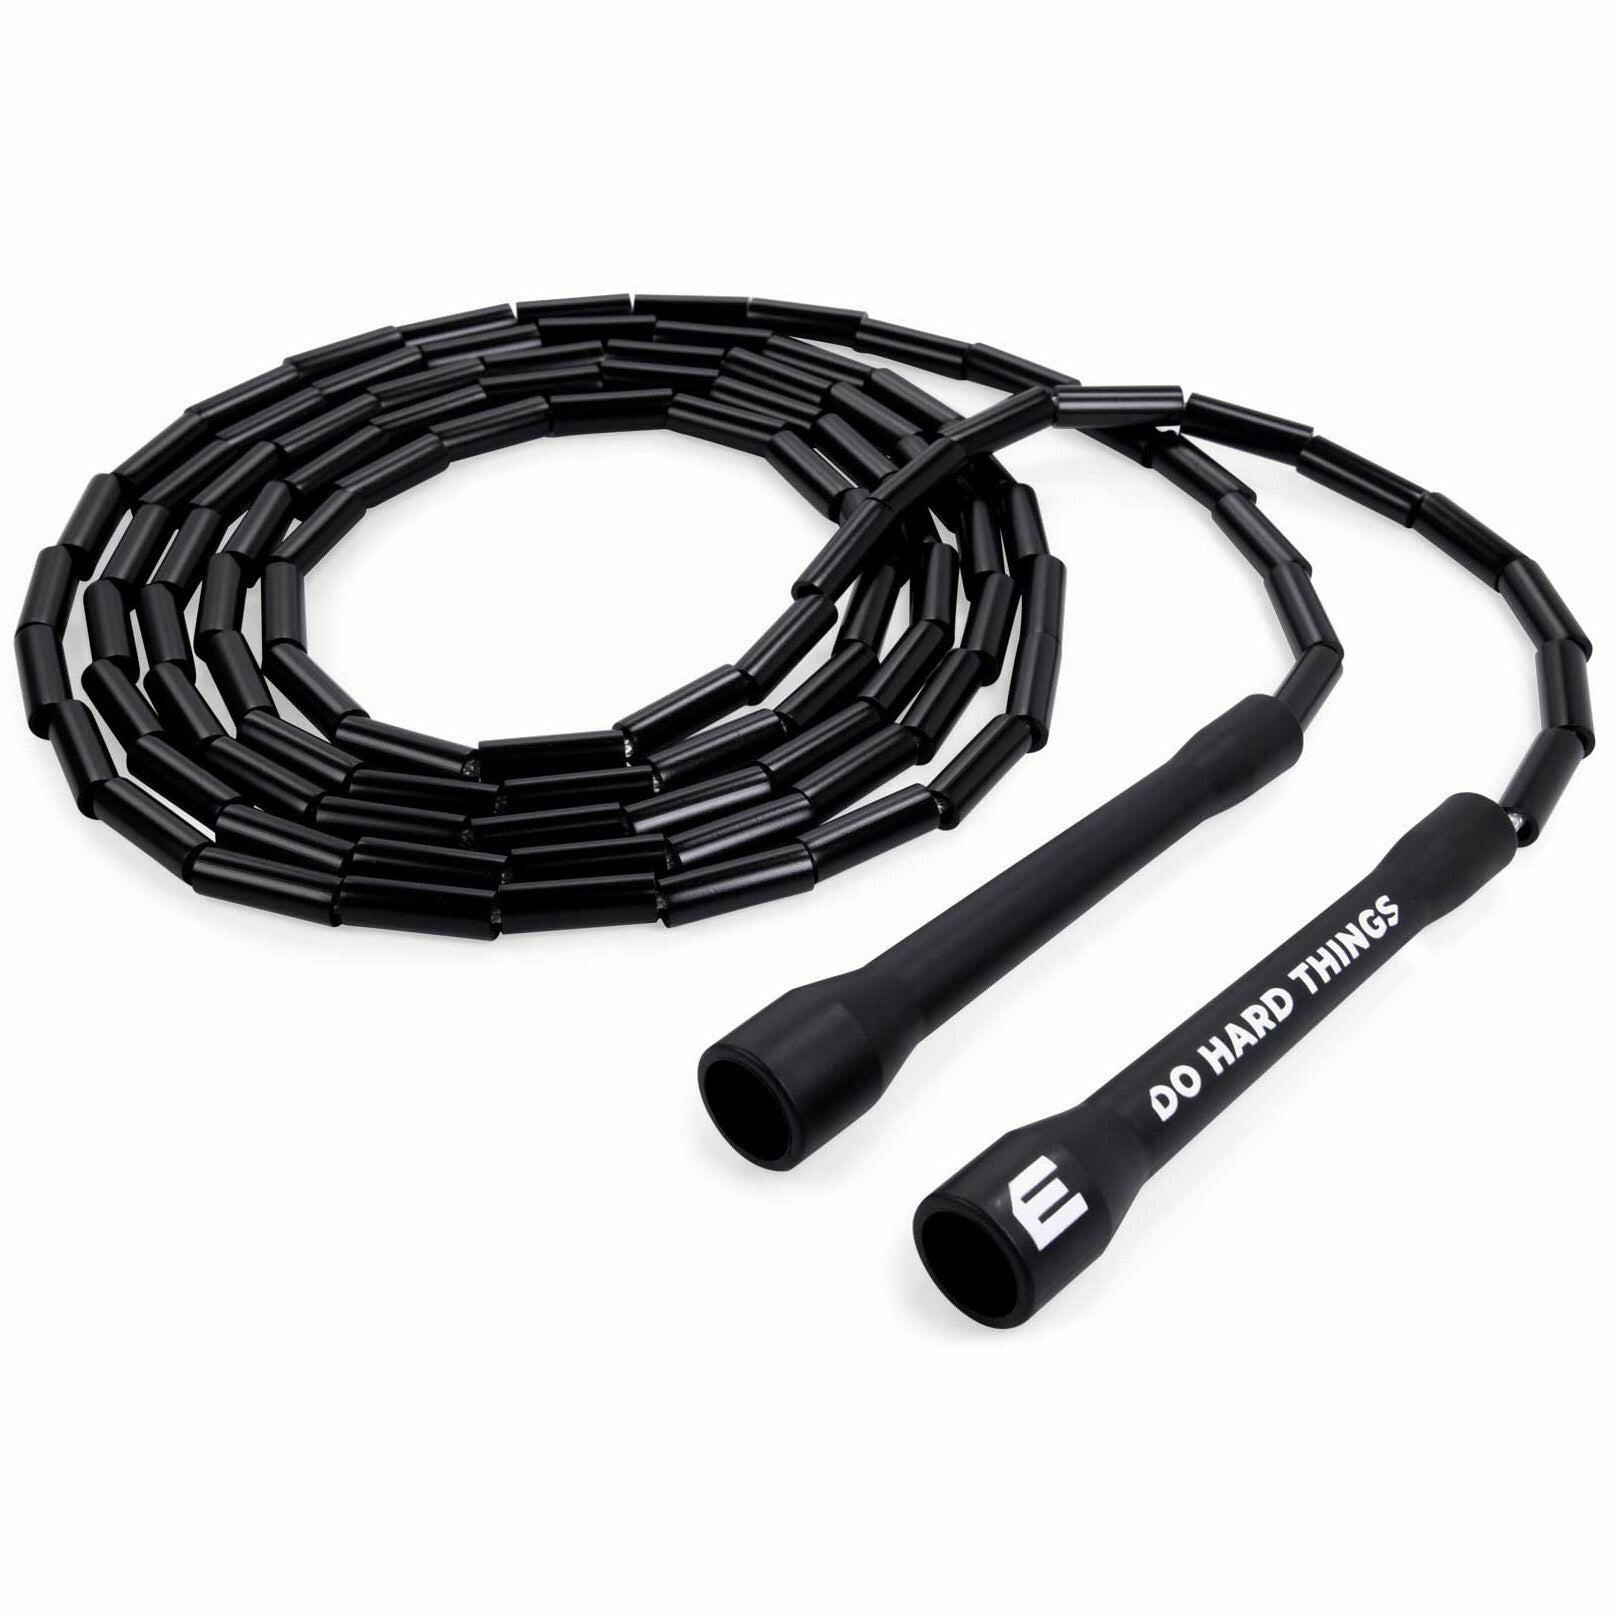 CLEARANCE: Cloth Double Dutch Jump Ropes (Set of 2) - Elite Jumps